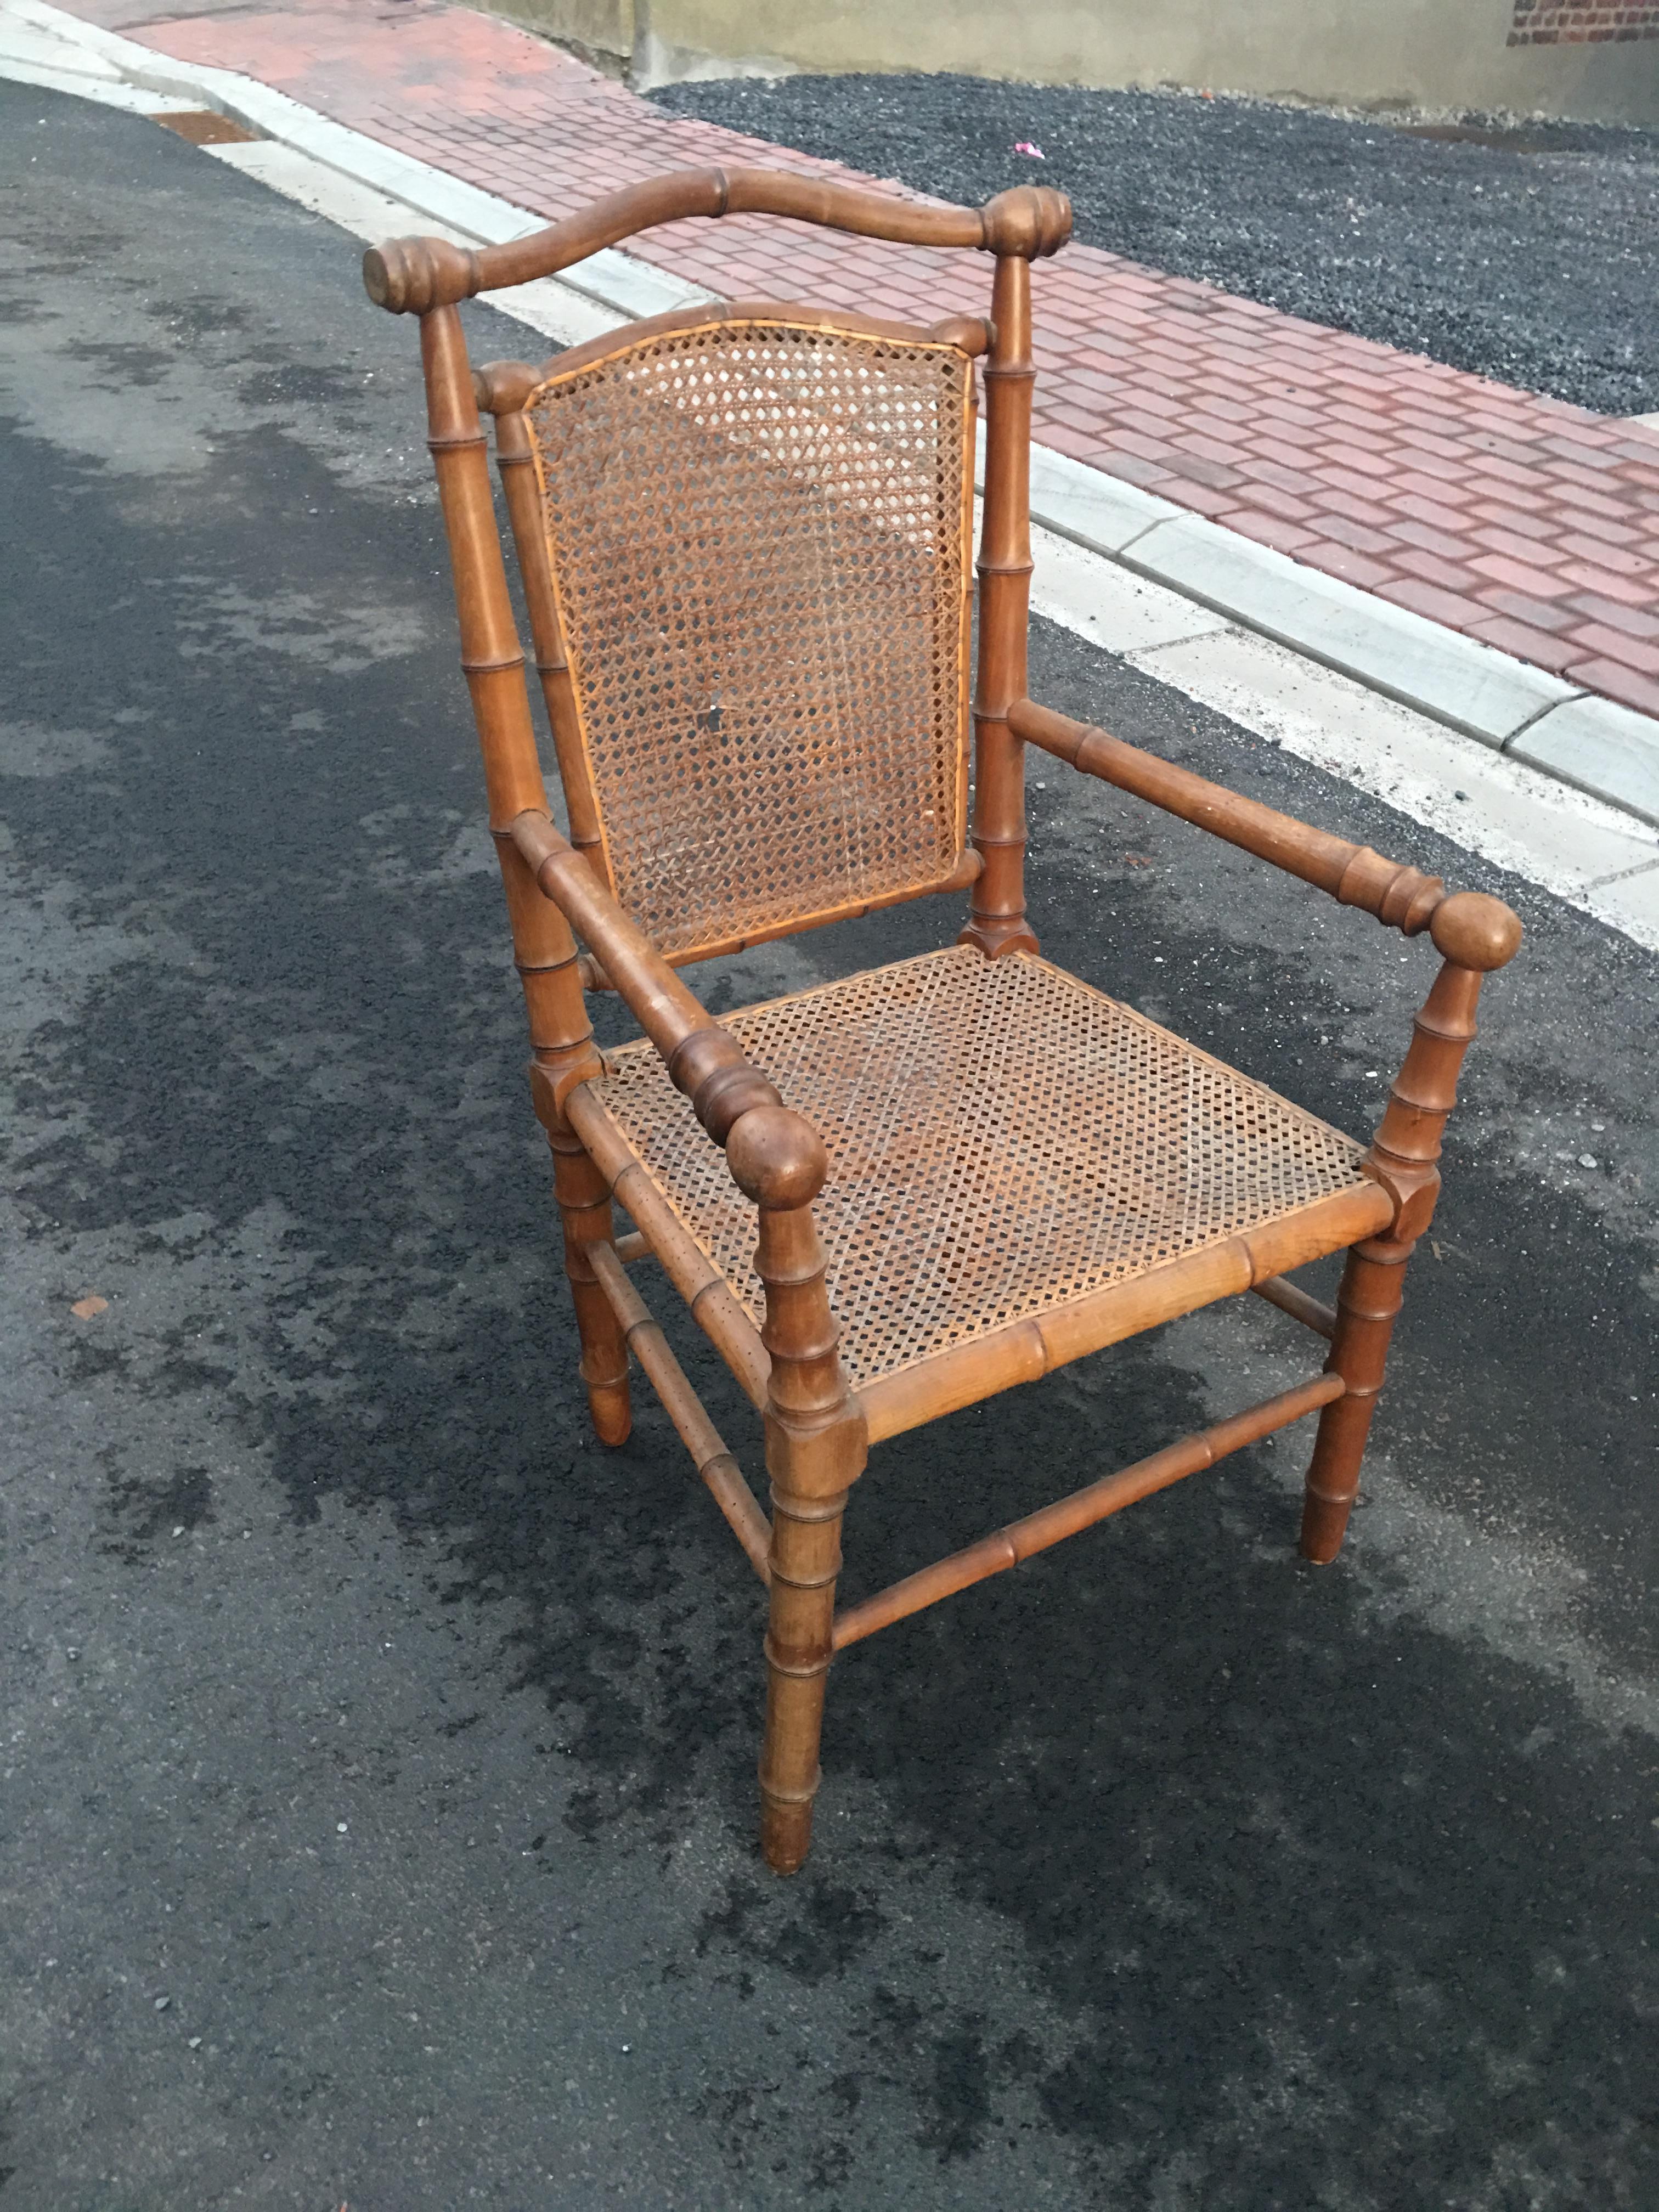 19th century Faux-Bamboo armchair
cannage in average condition, a hole in the file.